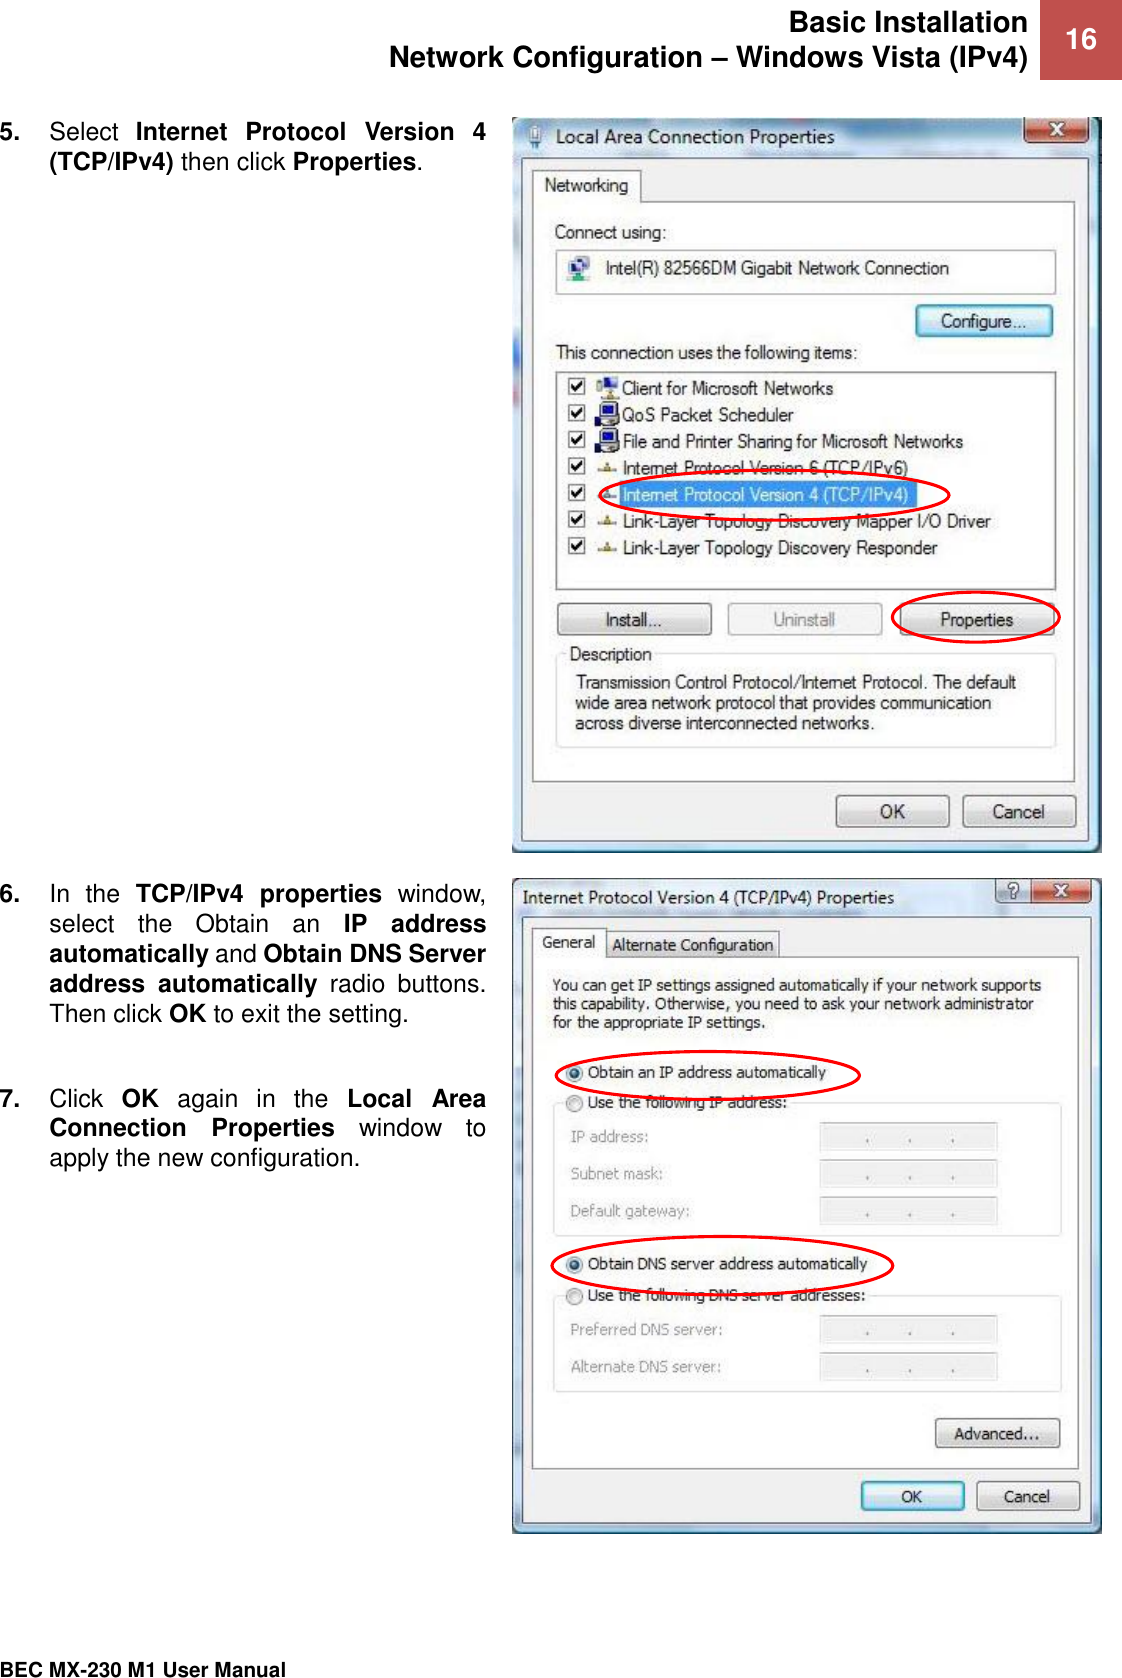 Basic Installation Network Configuration – Windows Vista (IPv4) 16   BEC MX-230 M1 User Manual  5. Select  Internet  Protocol  Version  4 (TCP/IPv4) then click Properties.  6. In  the  TCP/IPv4  properties  window, select  the  Obtain  an  IP  address automatically and Obtain DNS Server address  automatically  radio  buttons. Then click OK to exit the setting.  7. Click  OK  again  in  the  Local  Area Connection  Properties  window  to apply the new configuration.  